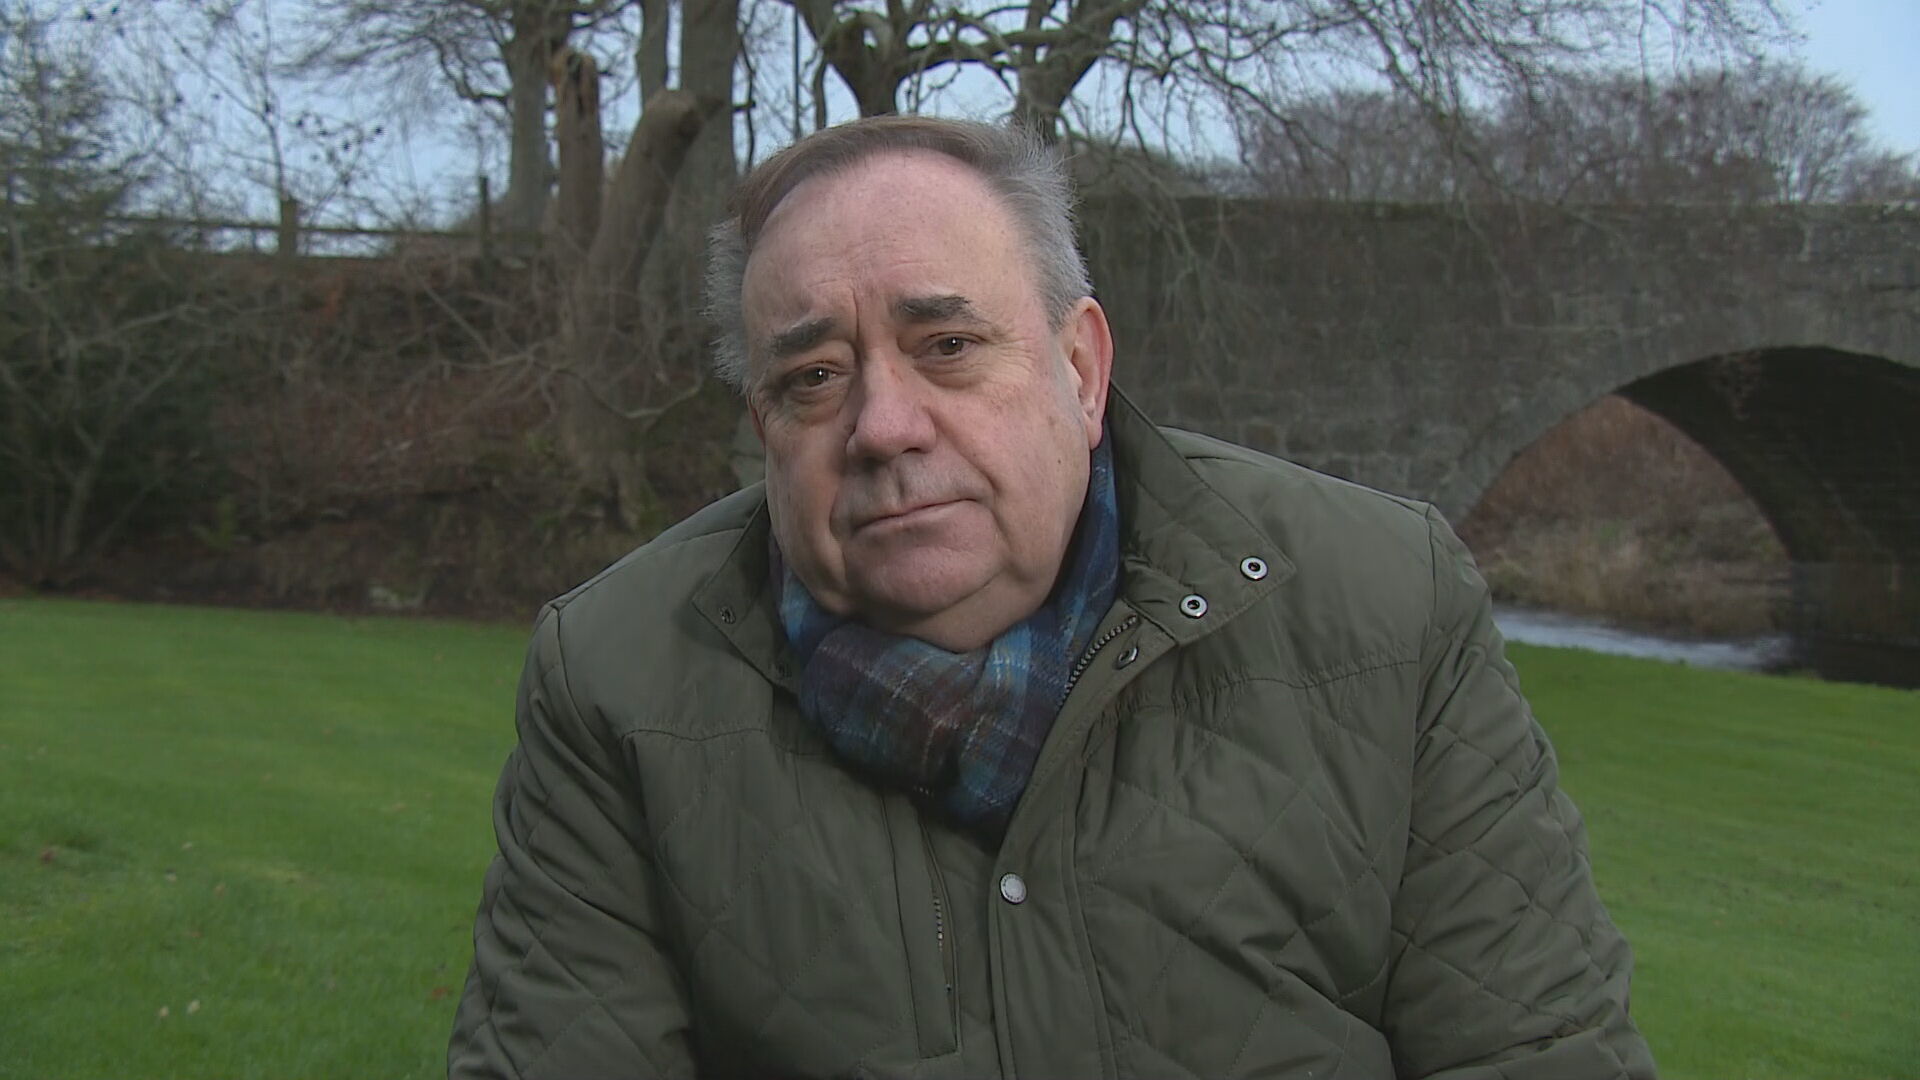 Nicola Sturgeon ruled out a reconciliation with her predecessor Alex Salmond.